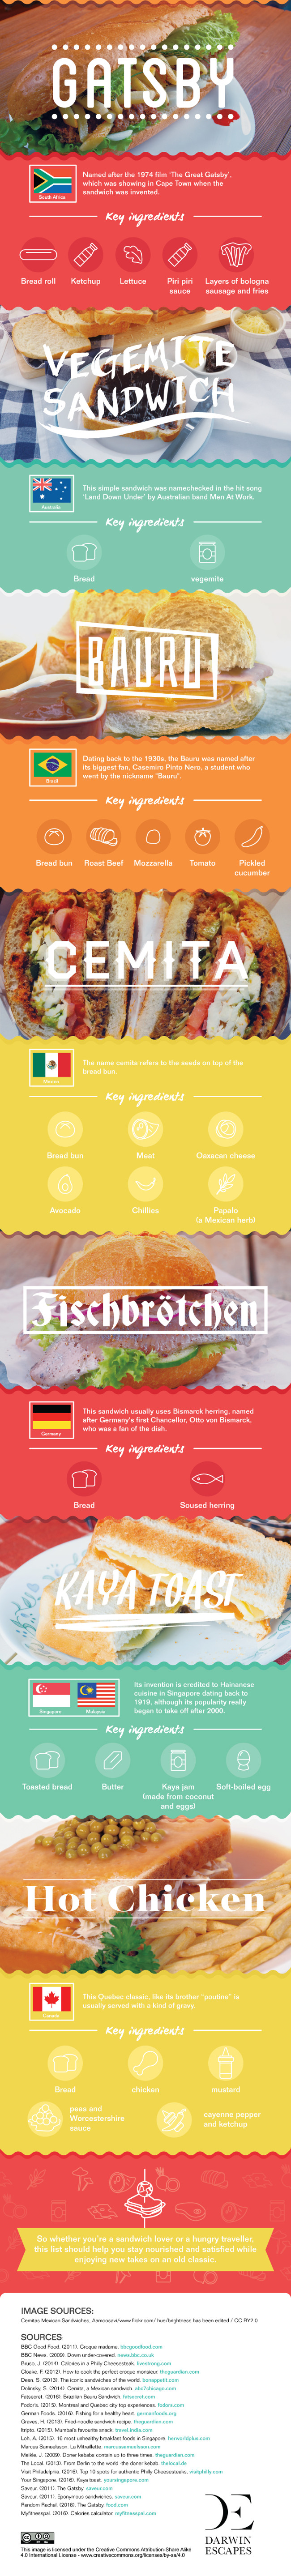 14 International Sandwiches You Need To Eat Before You Die [Infographic]